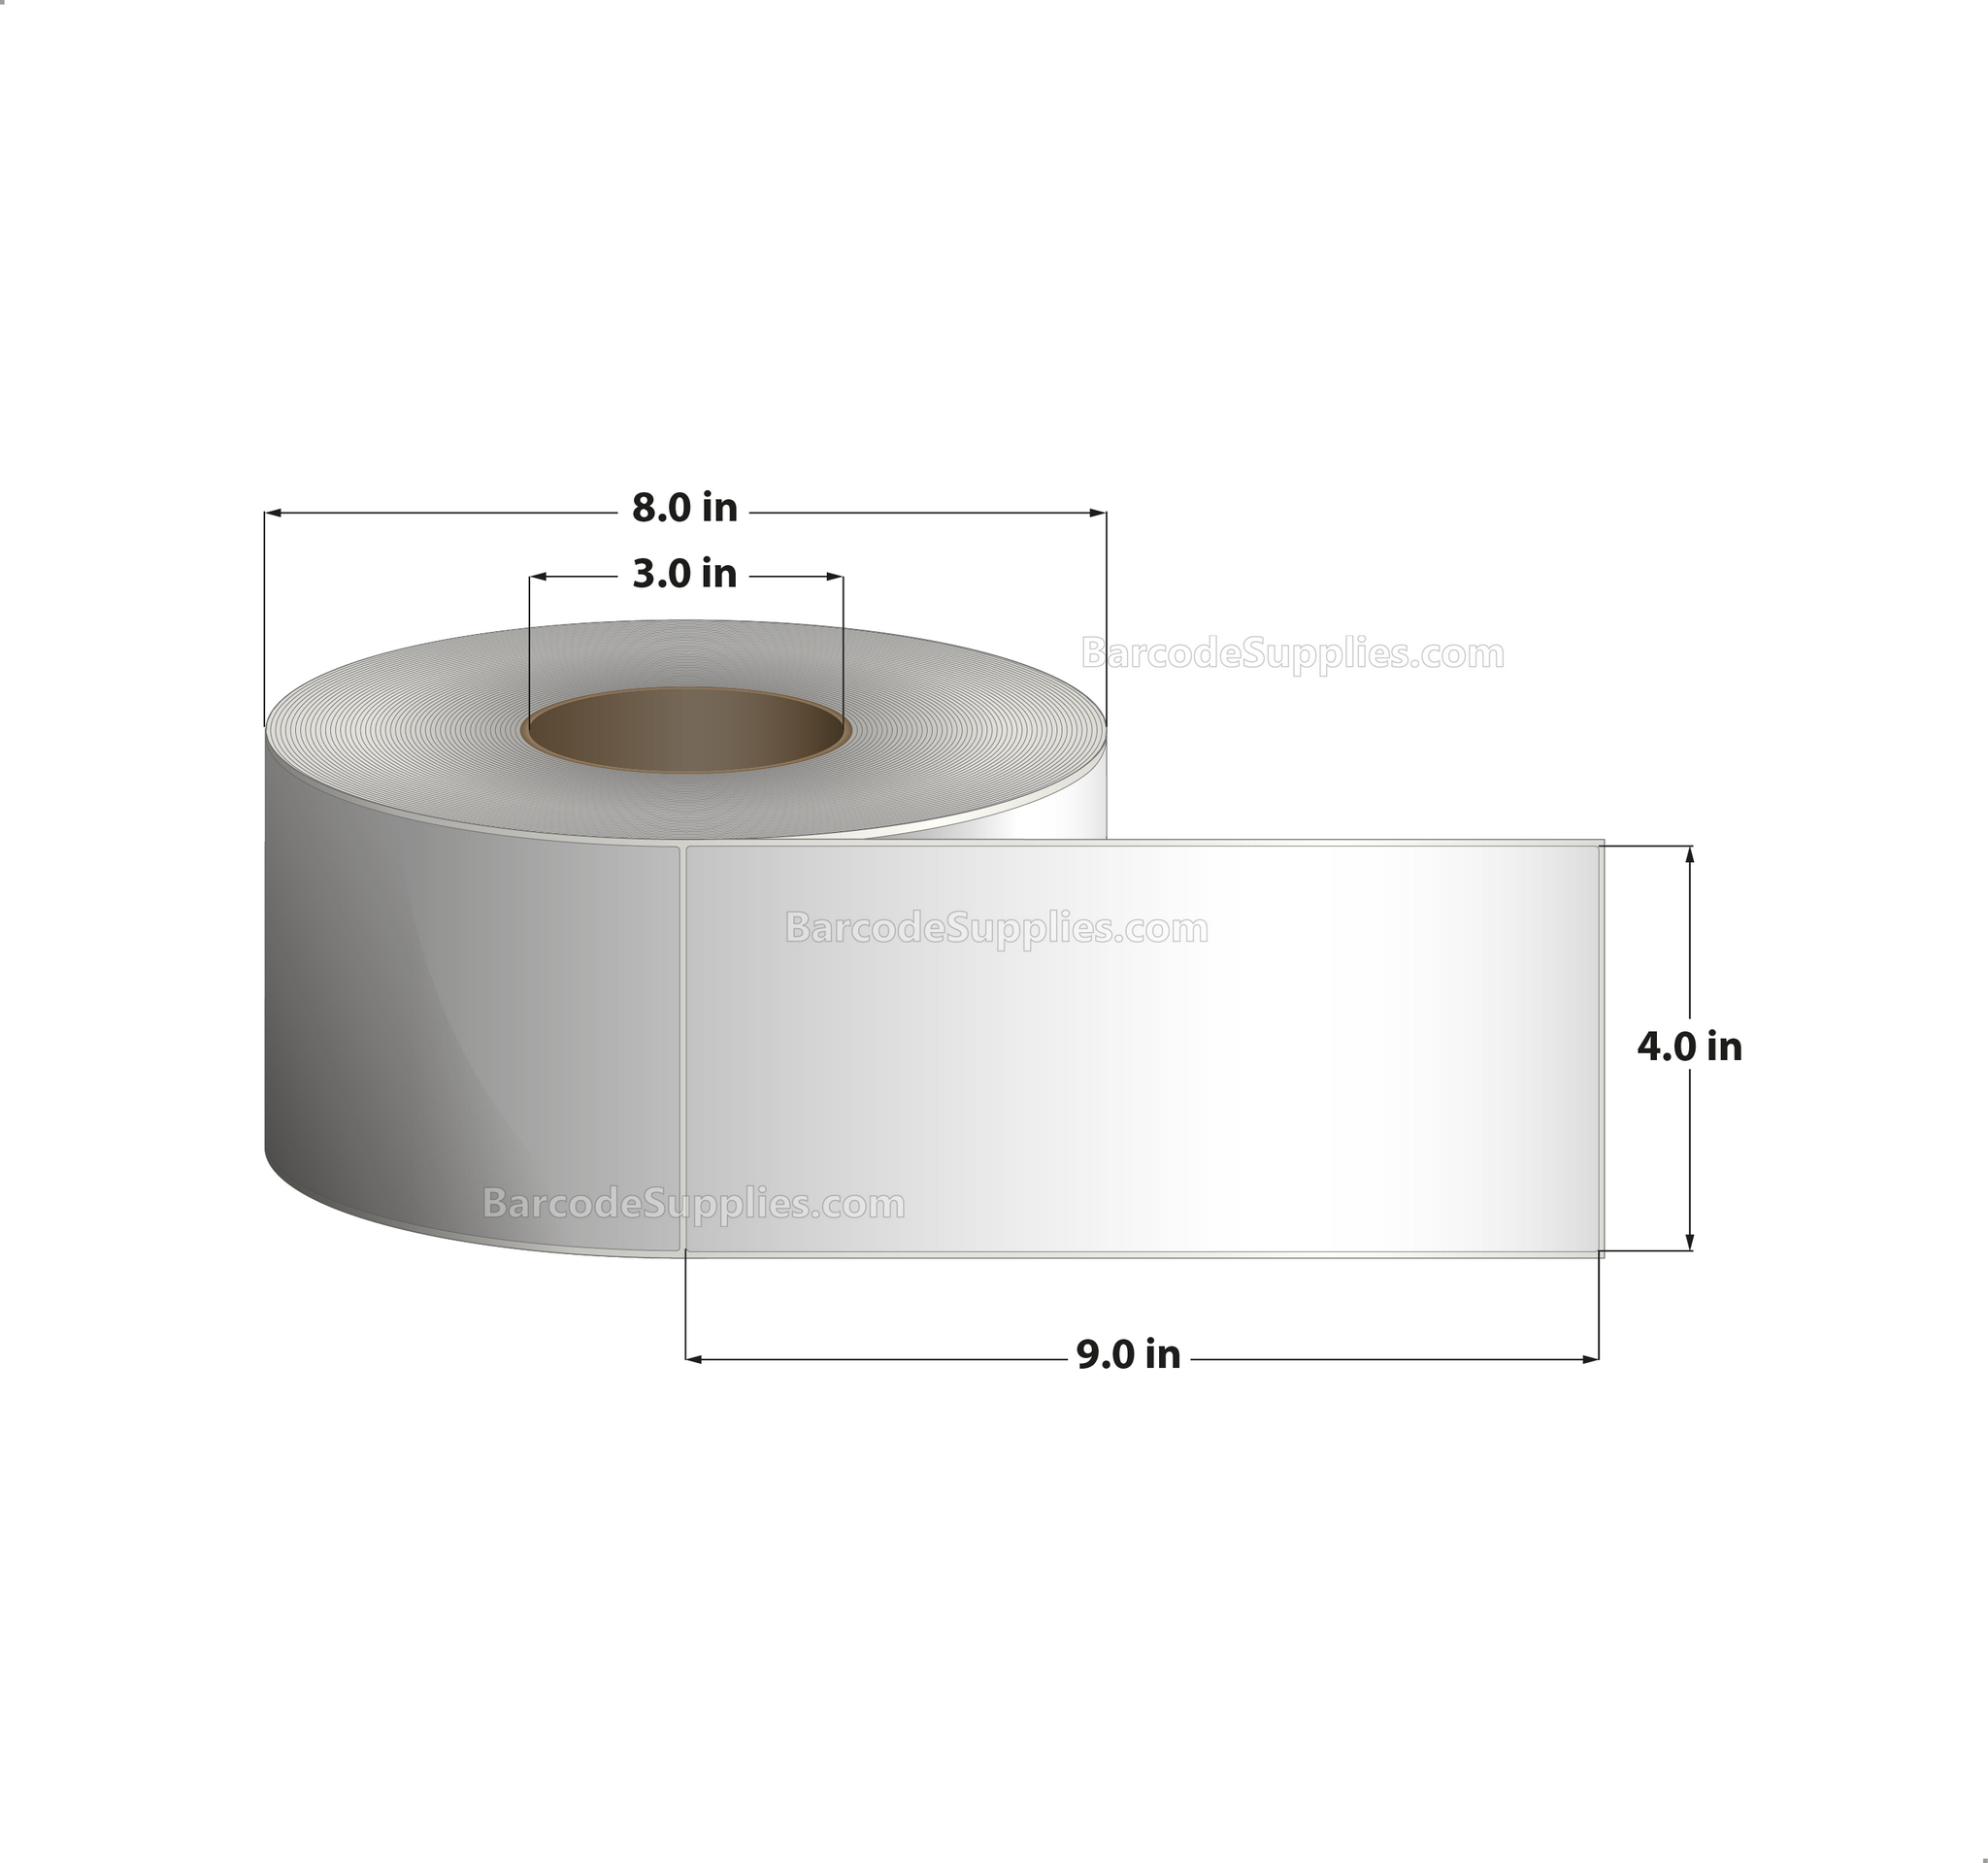 4 x 9 Thermal Transfer White Labels With Rubber Adhesive - No Perforation - 750 Labels Per Roll - Carton Of 4 Rolls - 3000 Labels Total - MPN: CTT400900-3